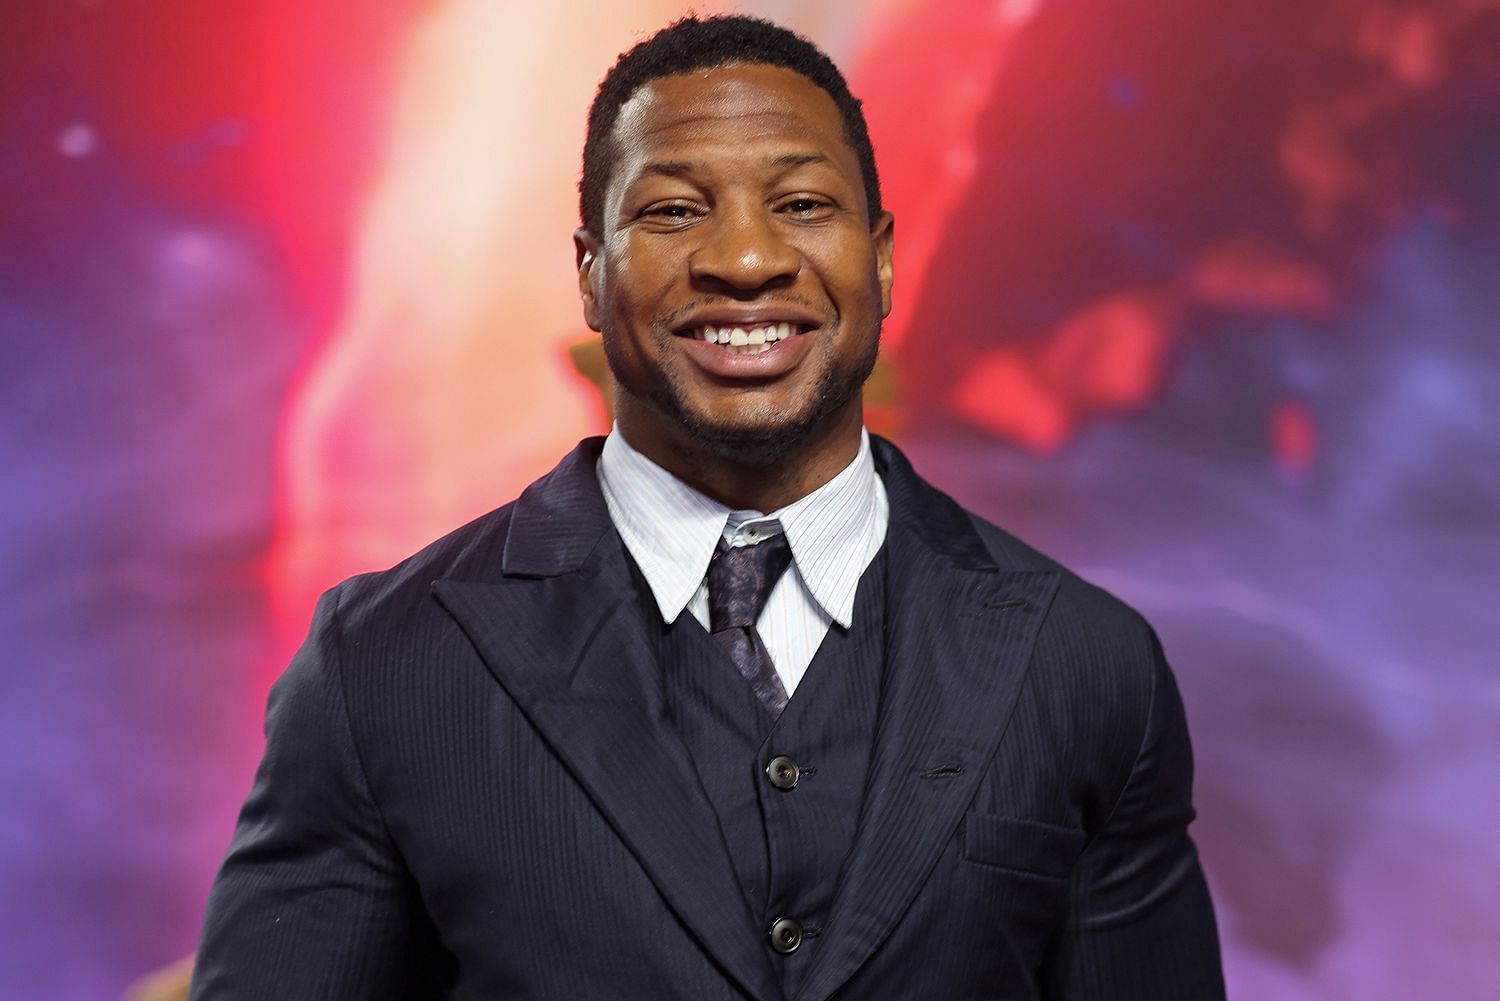 Despite controversy, Jonathan Majors remains a strong candidate for future Marvel projects (Image via Getty)